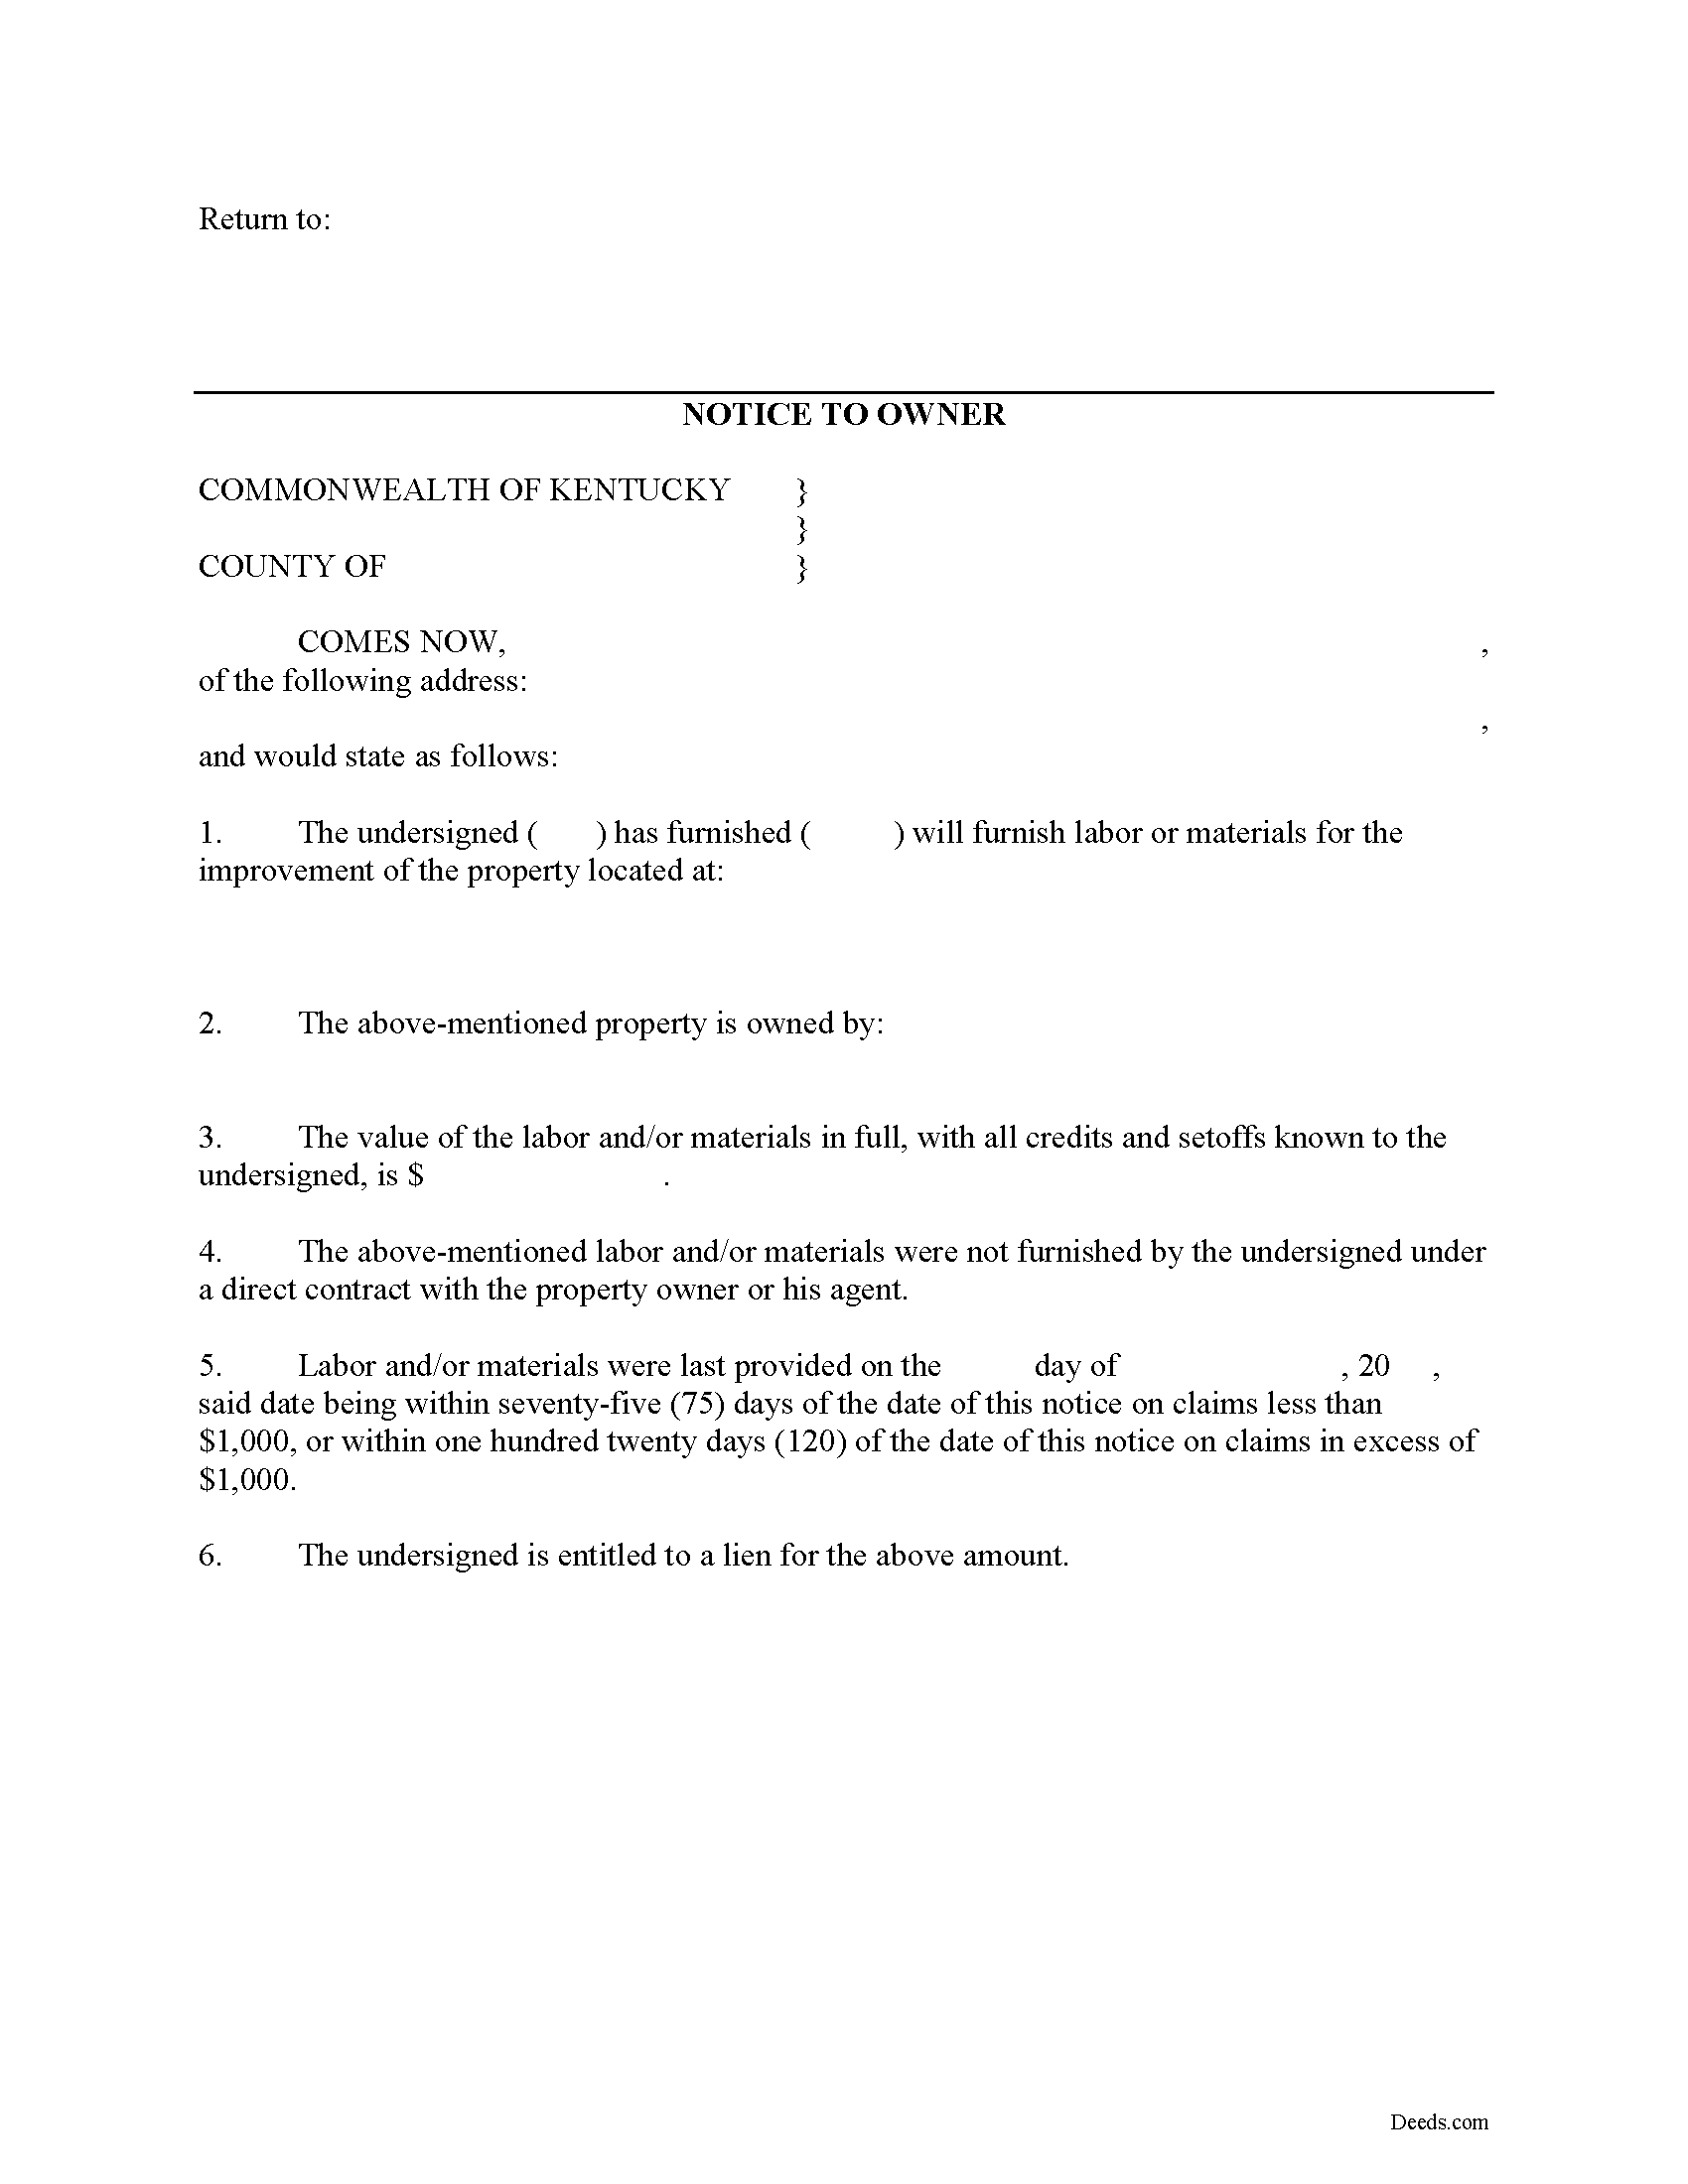 Notice to Owner Form